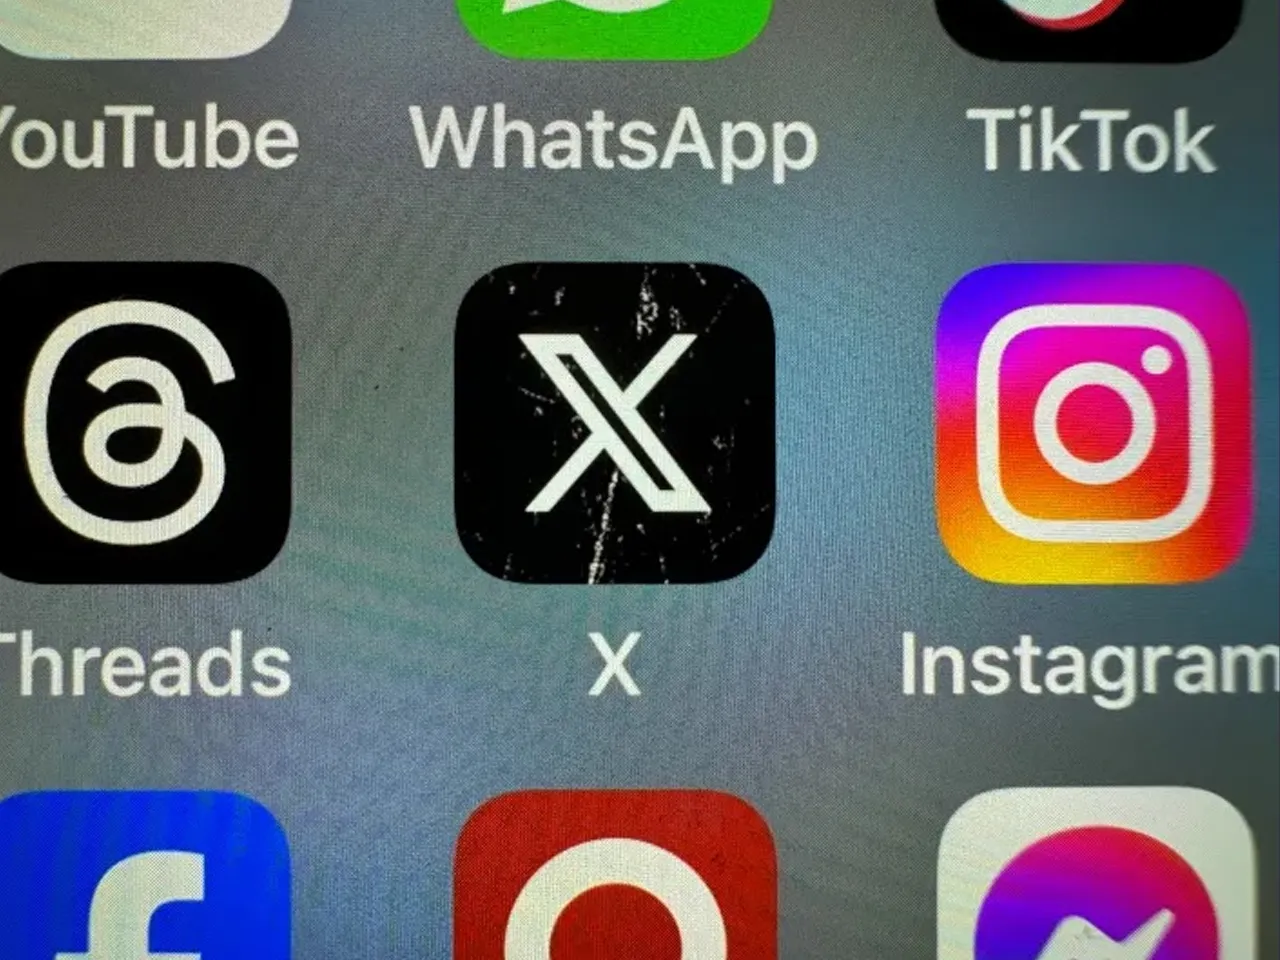 Threads has three times the daily iOS downloads over X